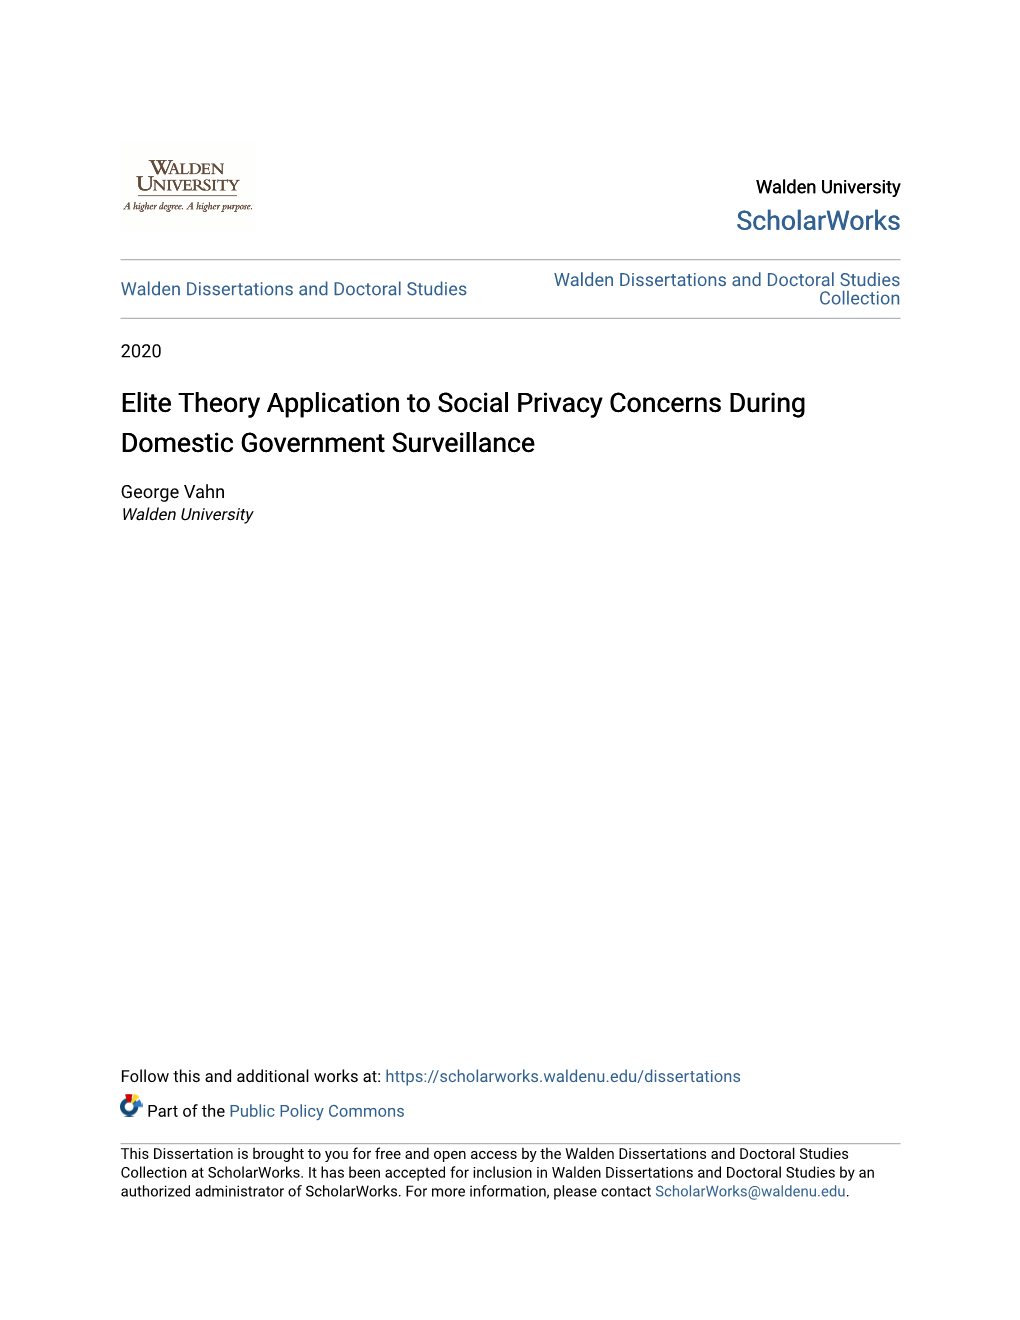 Elite Theory Application to Social Privacy Concerns During Domestic Government Surveillance